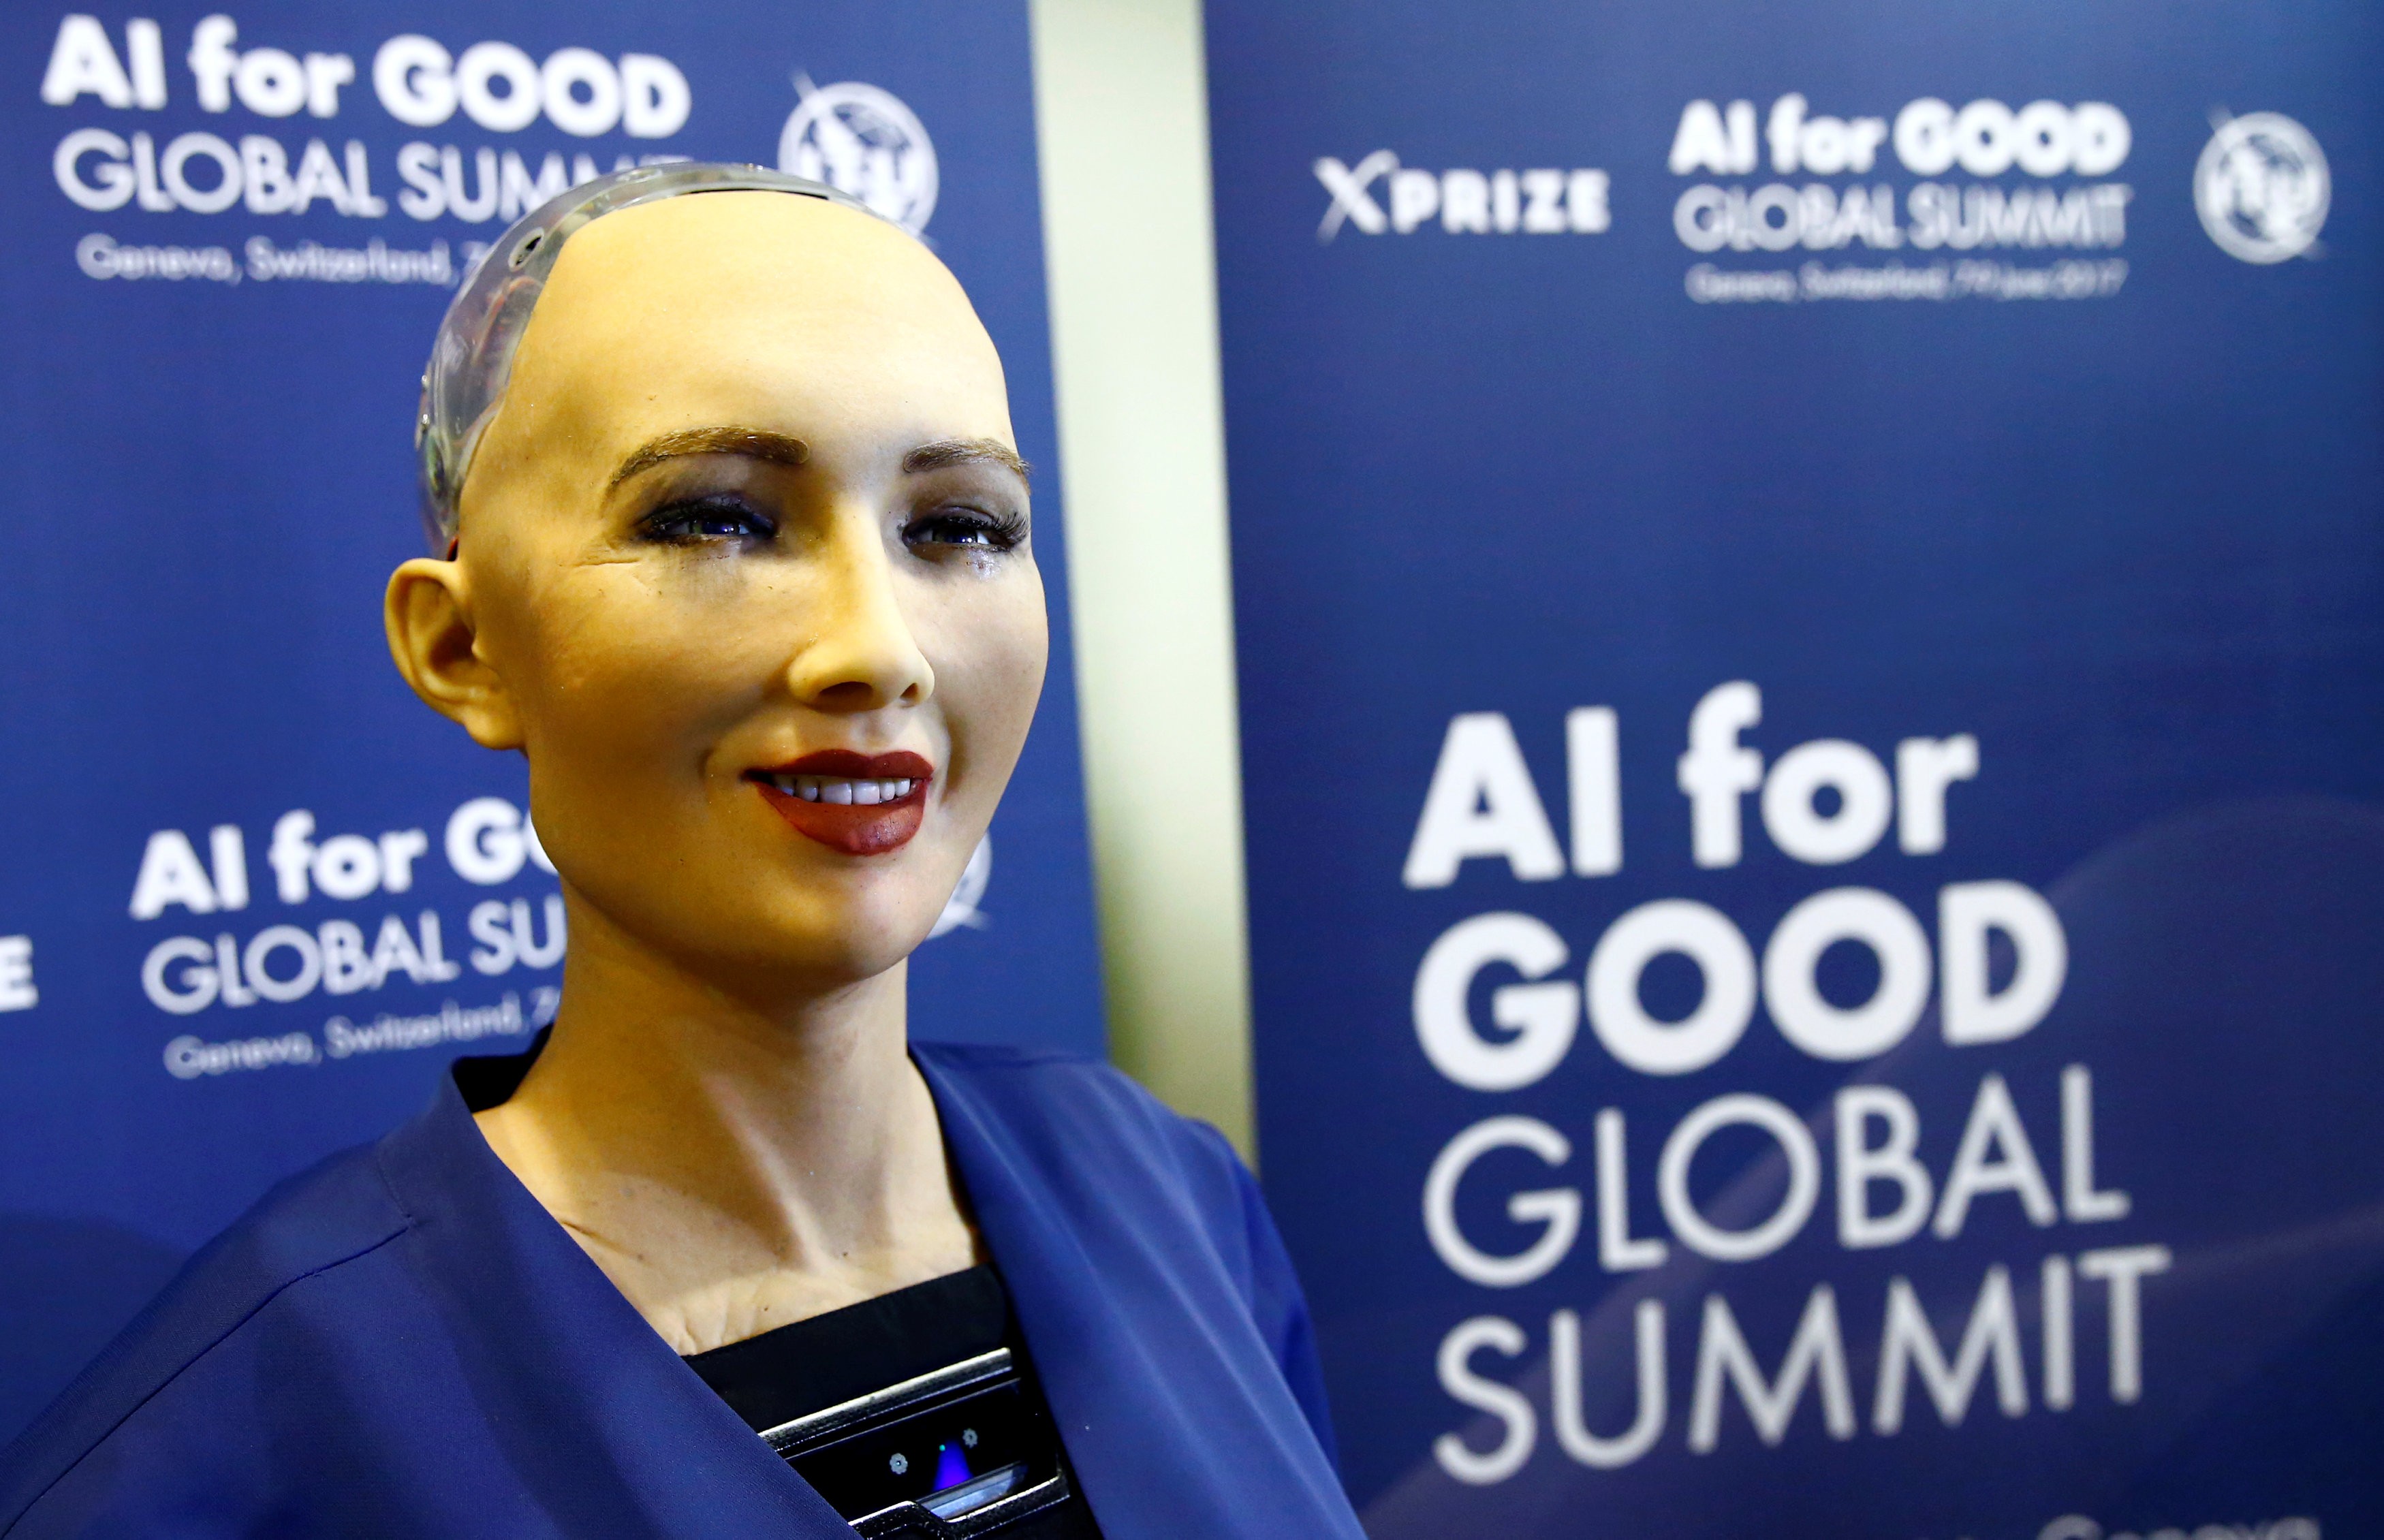 Sophia, a robot integrating the latest technologies and artificial intelligence developed by Hanson Robotics is pictured during a presentation at the "AI for Good" Global Summit at the International Telecommunication Union in Geneva last month. Photo: Reuters